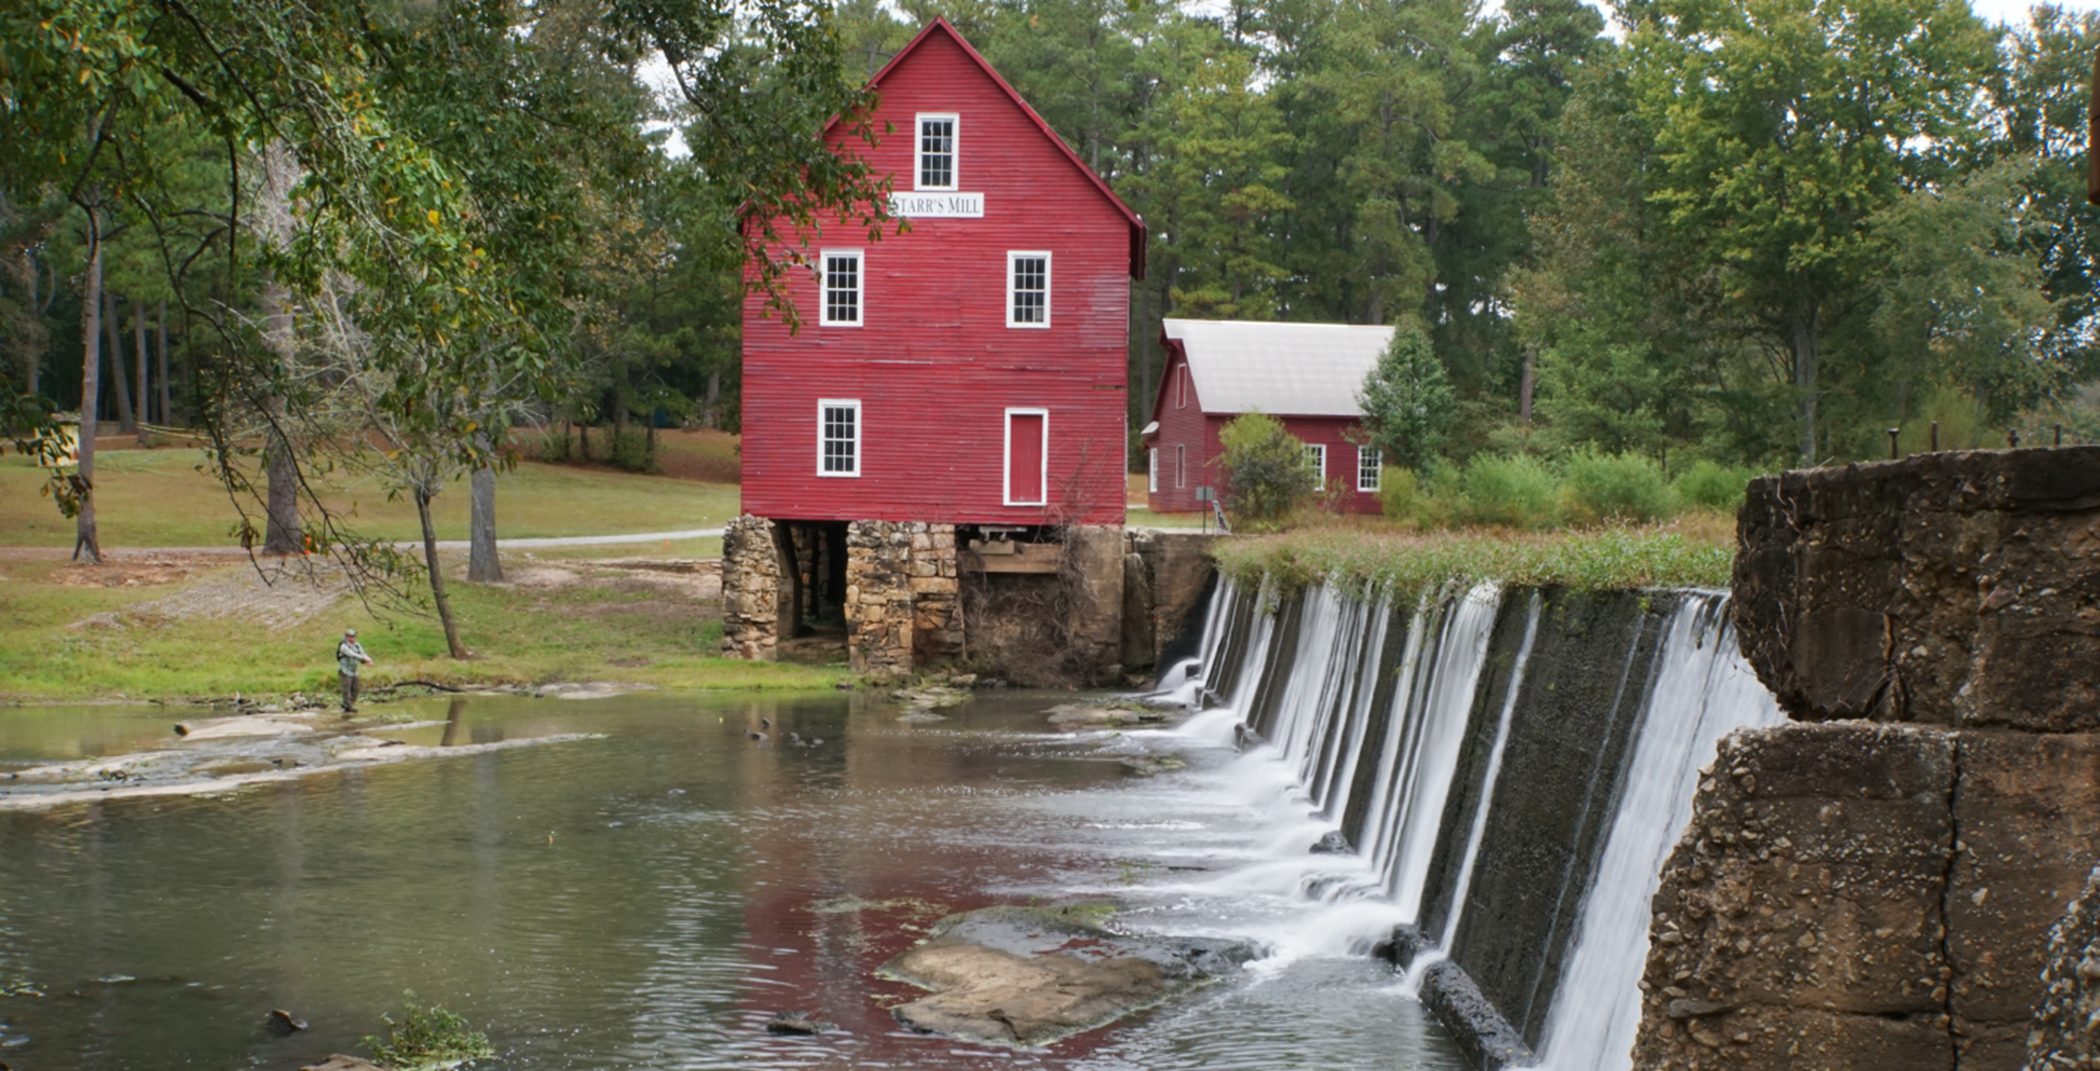 Mill Park nearby- perfect for having picnics and fishing